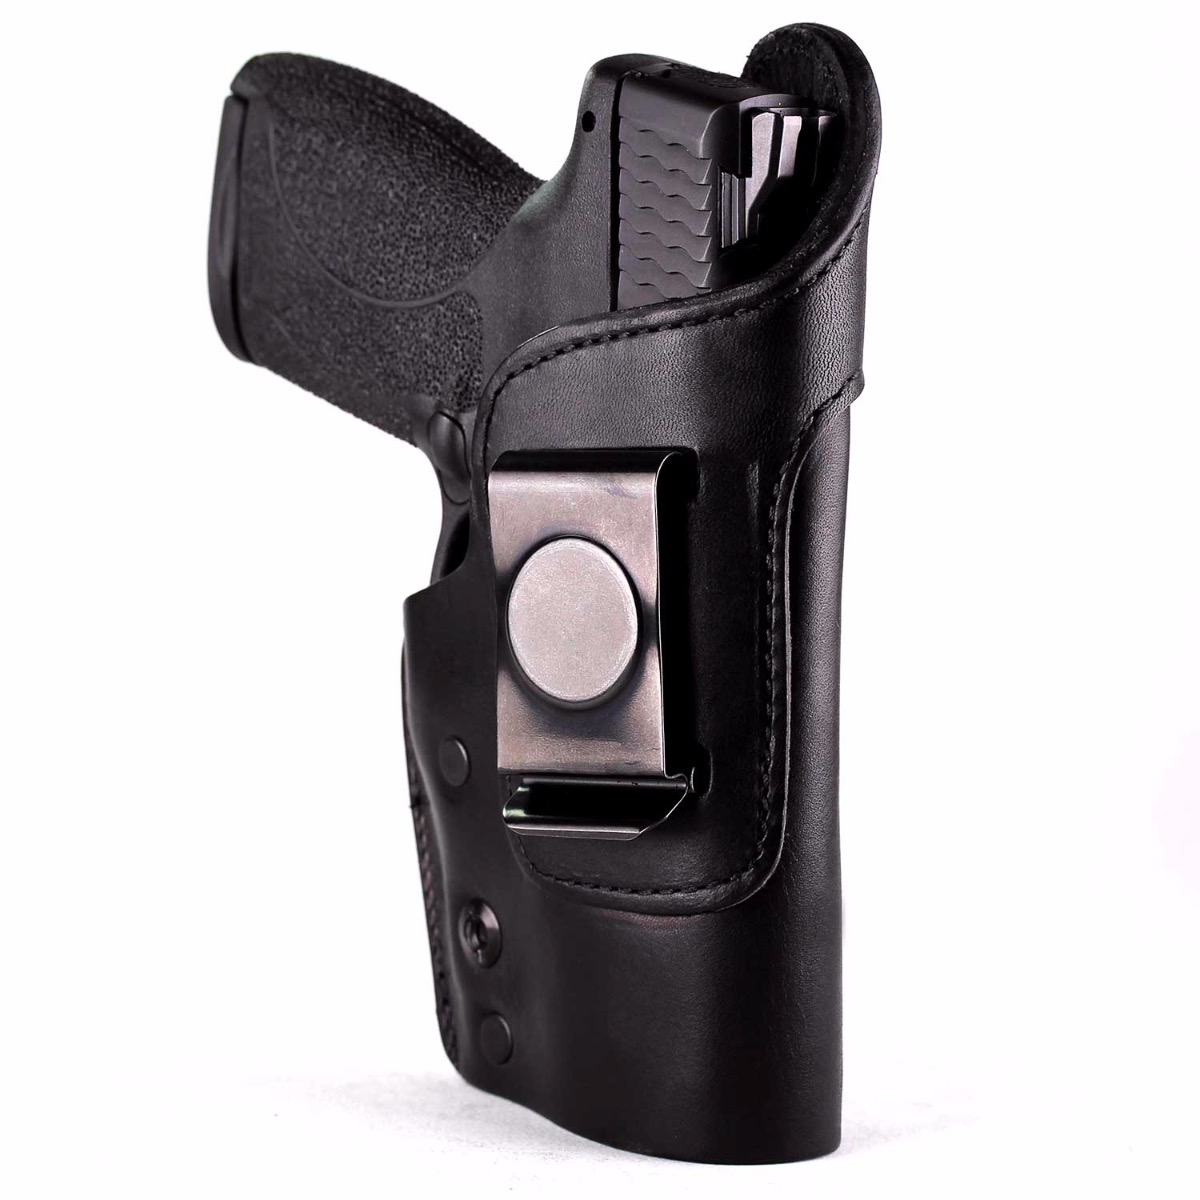 XDS 45 9 Black Leather Kydex Gun Holster Springfield Armory IWB Tuck Concealed 